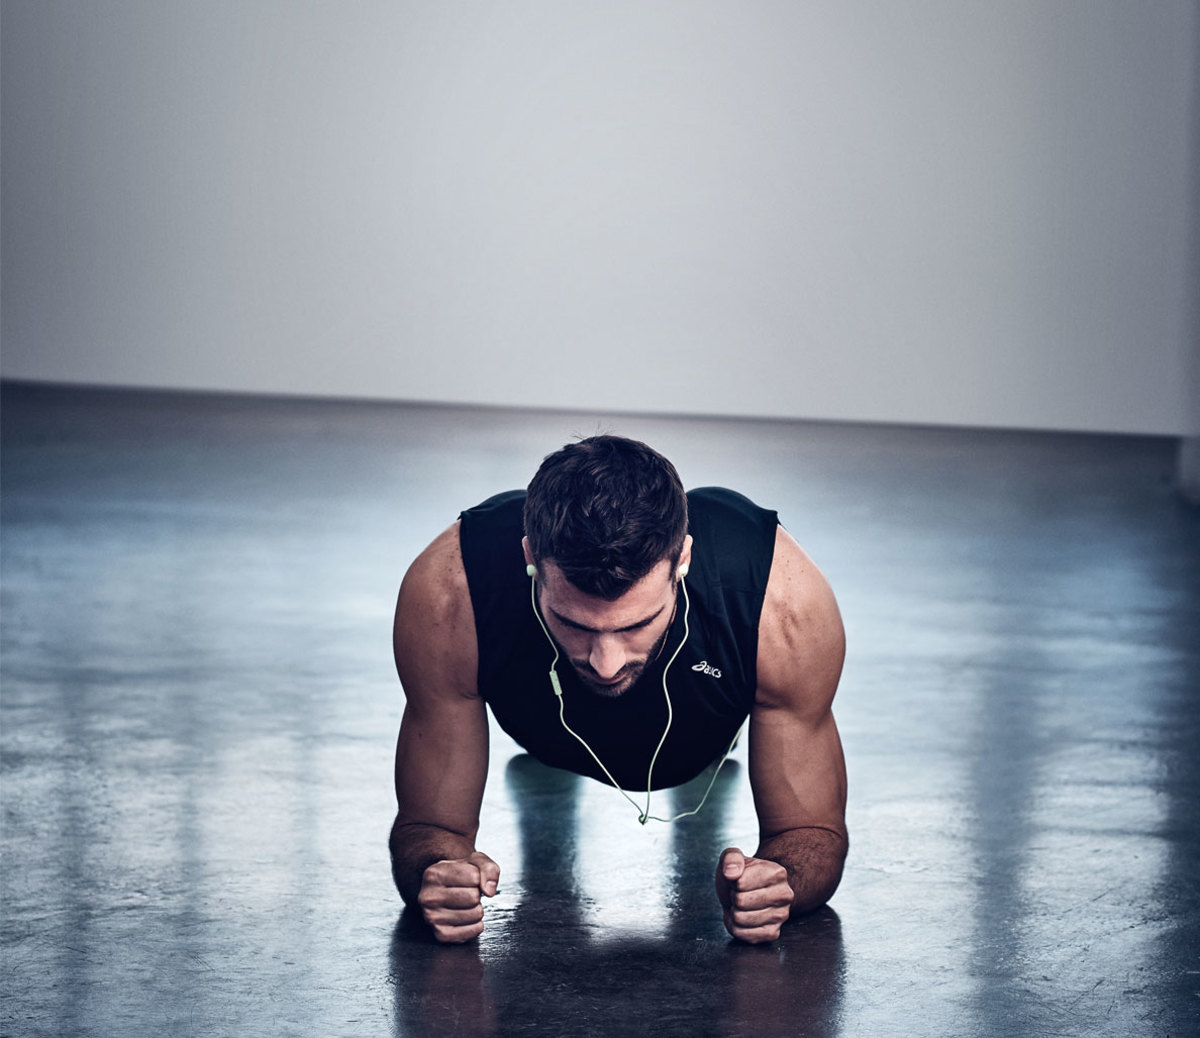 The Brutal Hour-Long Pushup Workout for a Good Cause - Muscle